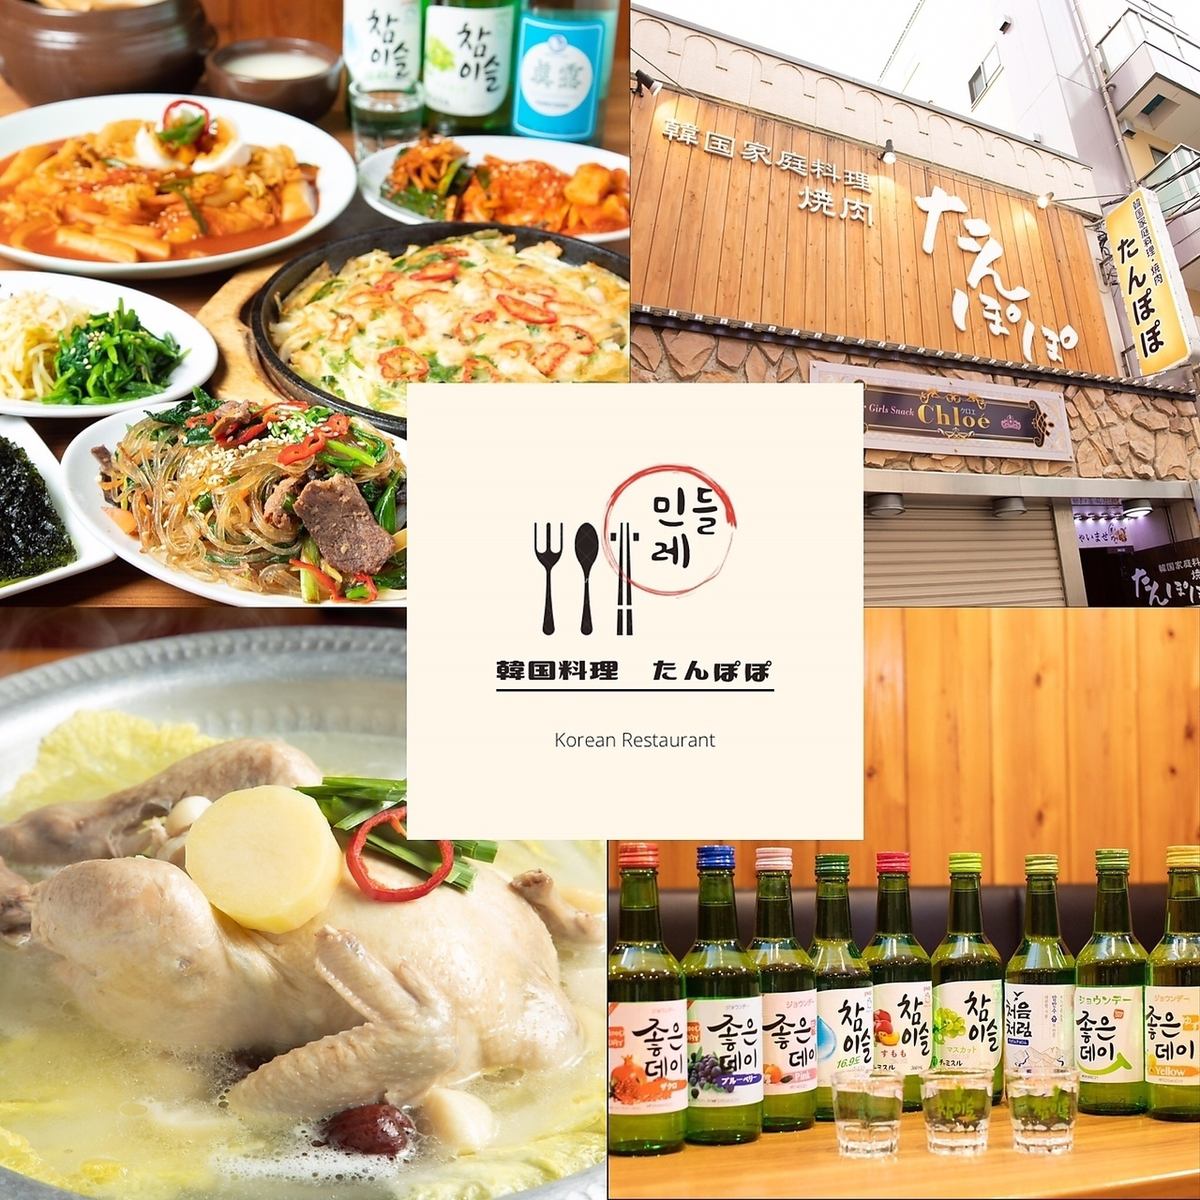 A famous restaurant where you can enjoy authentic Korean flavors ★Cheese dakgalbi has started♪